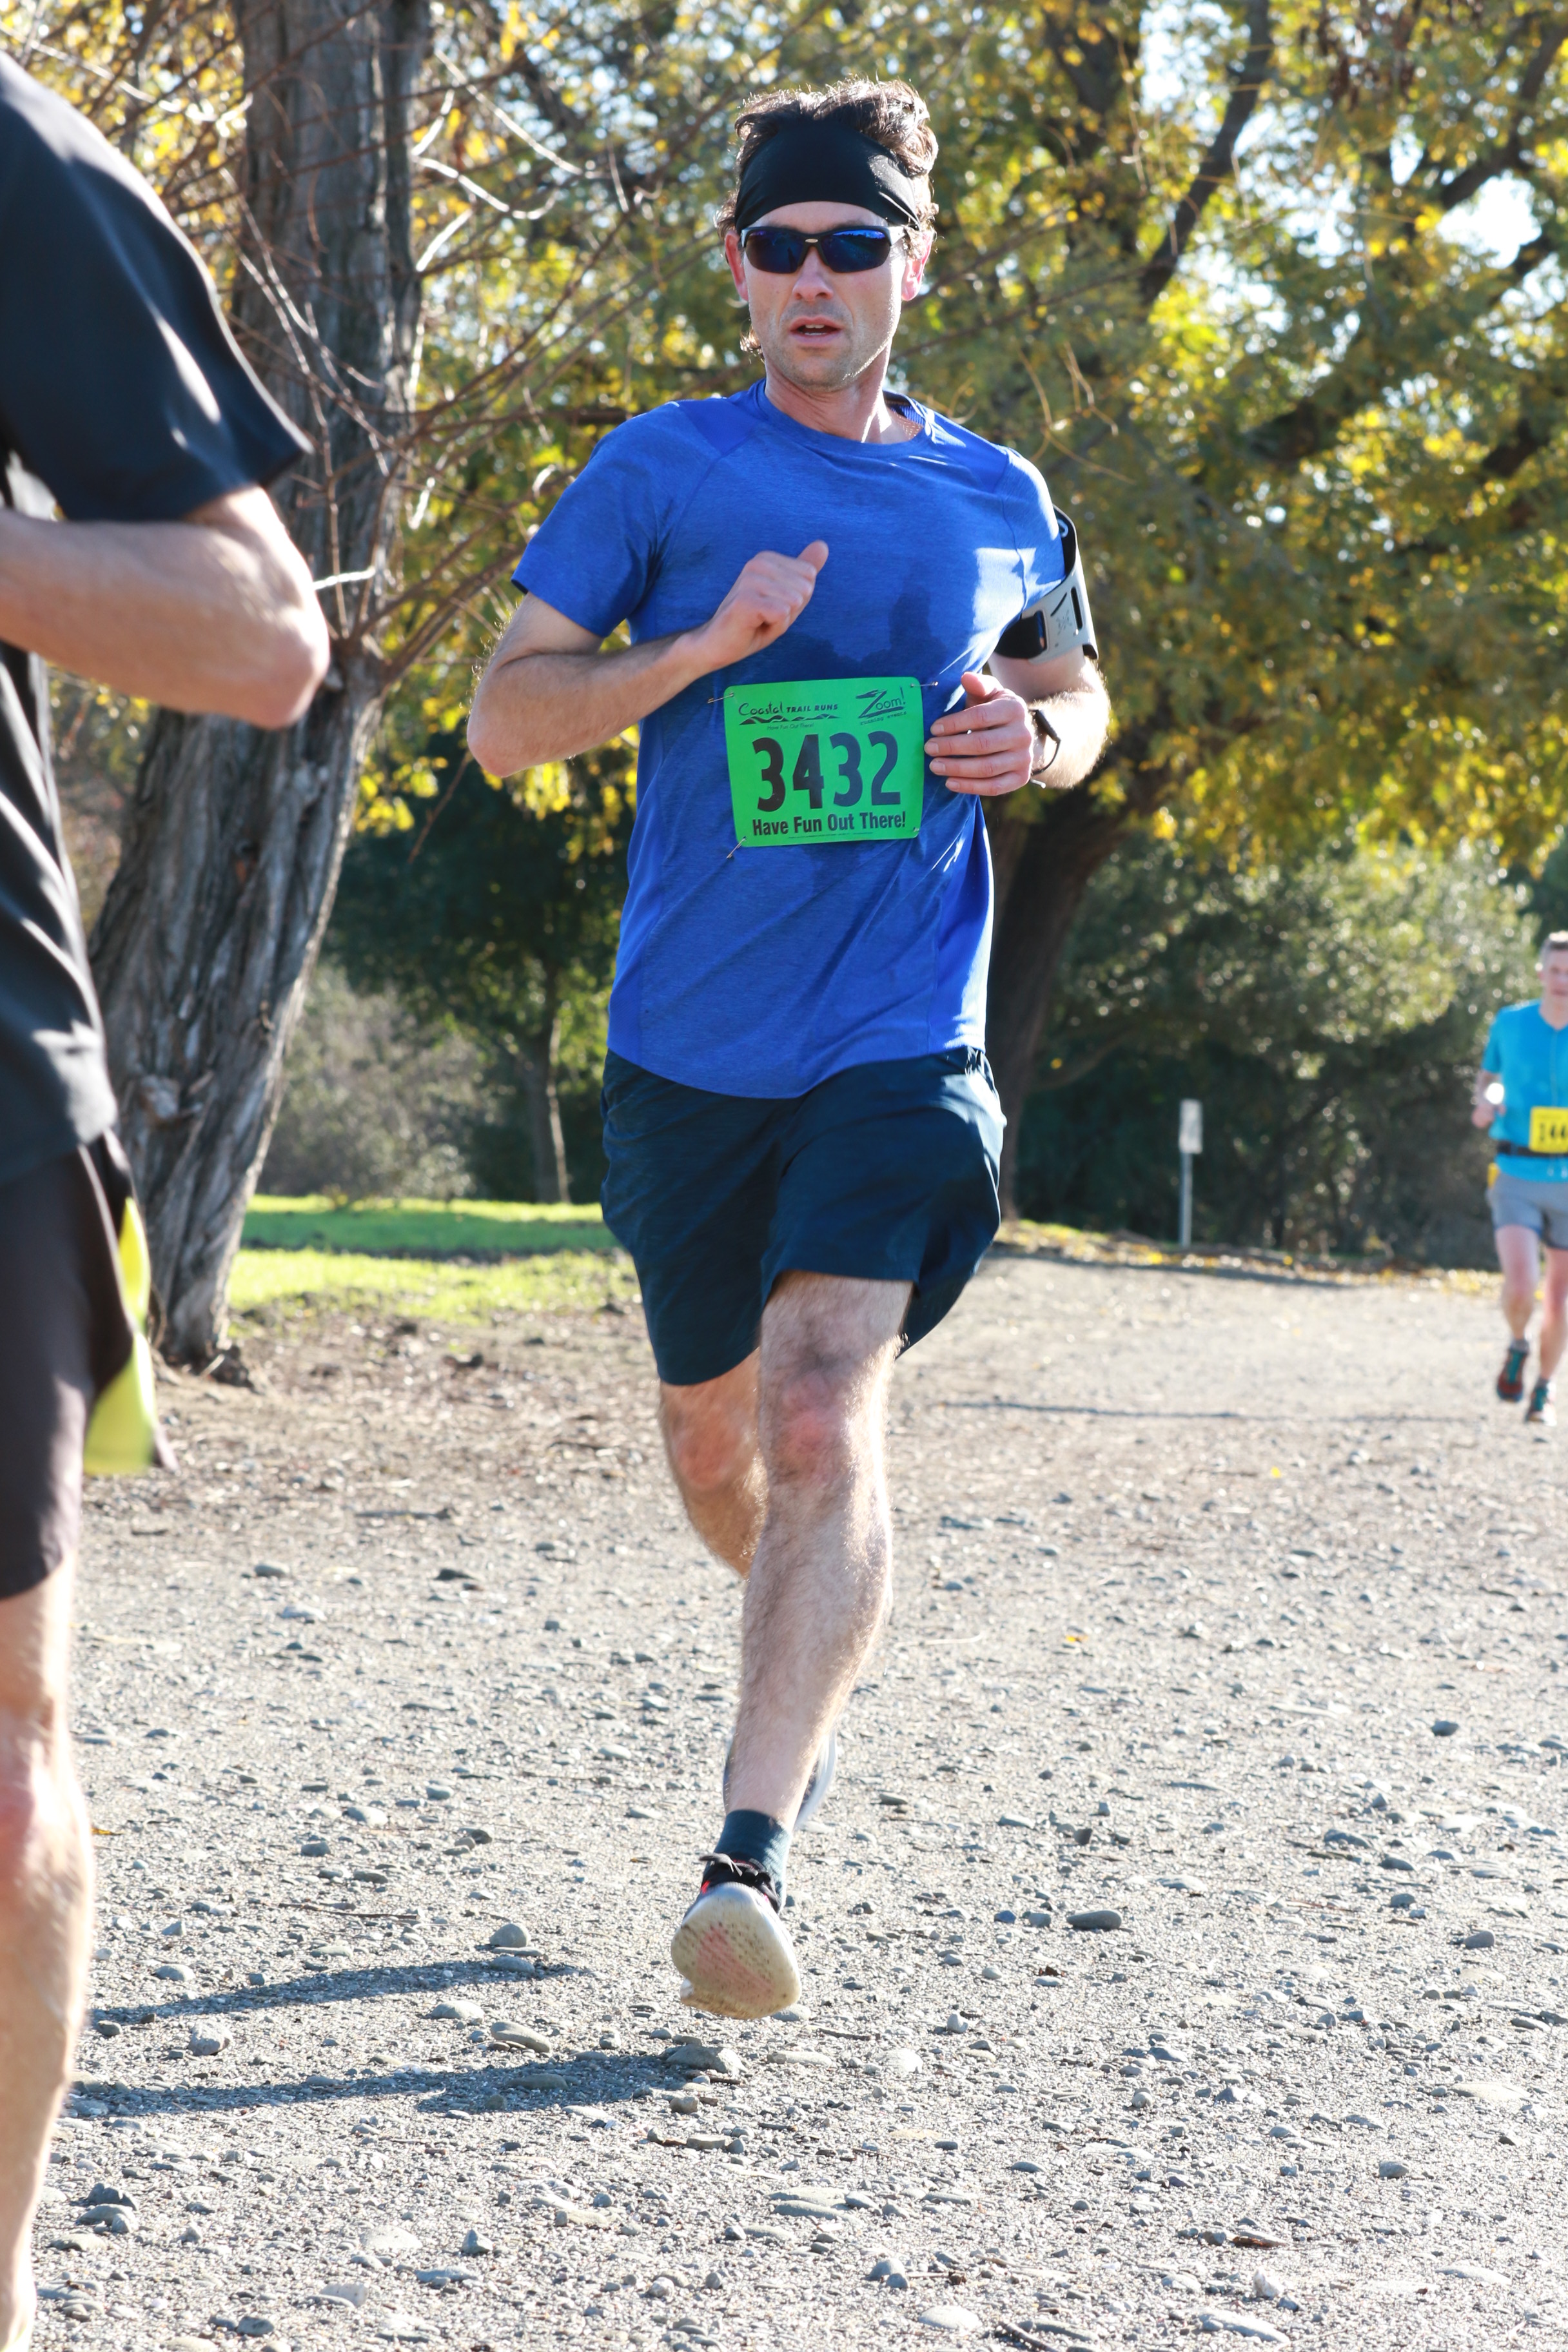 Mid-race in Fremont in 2019 (photo)